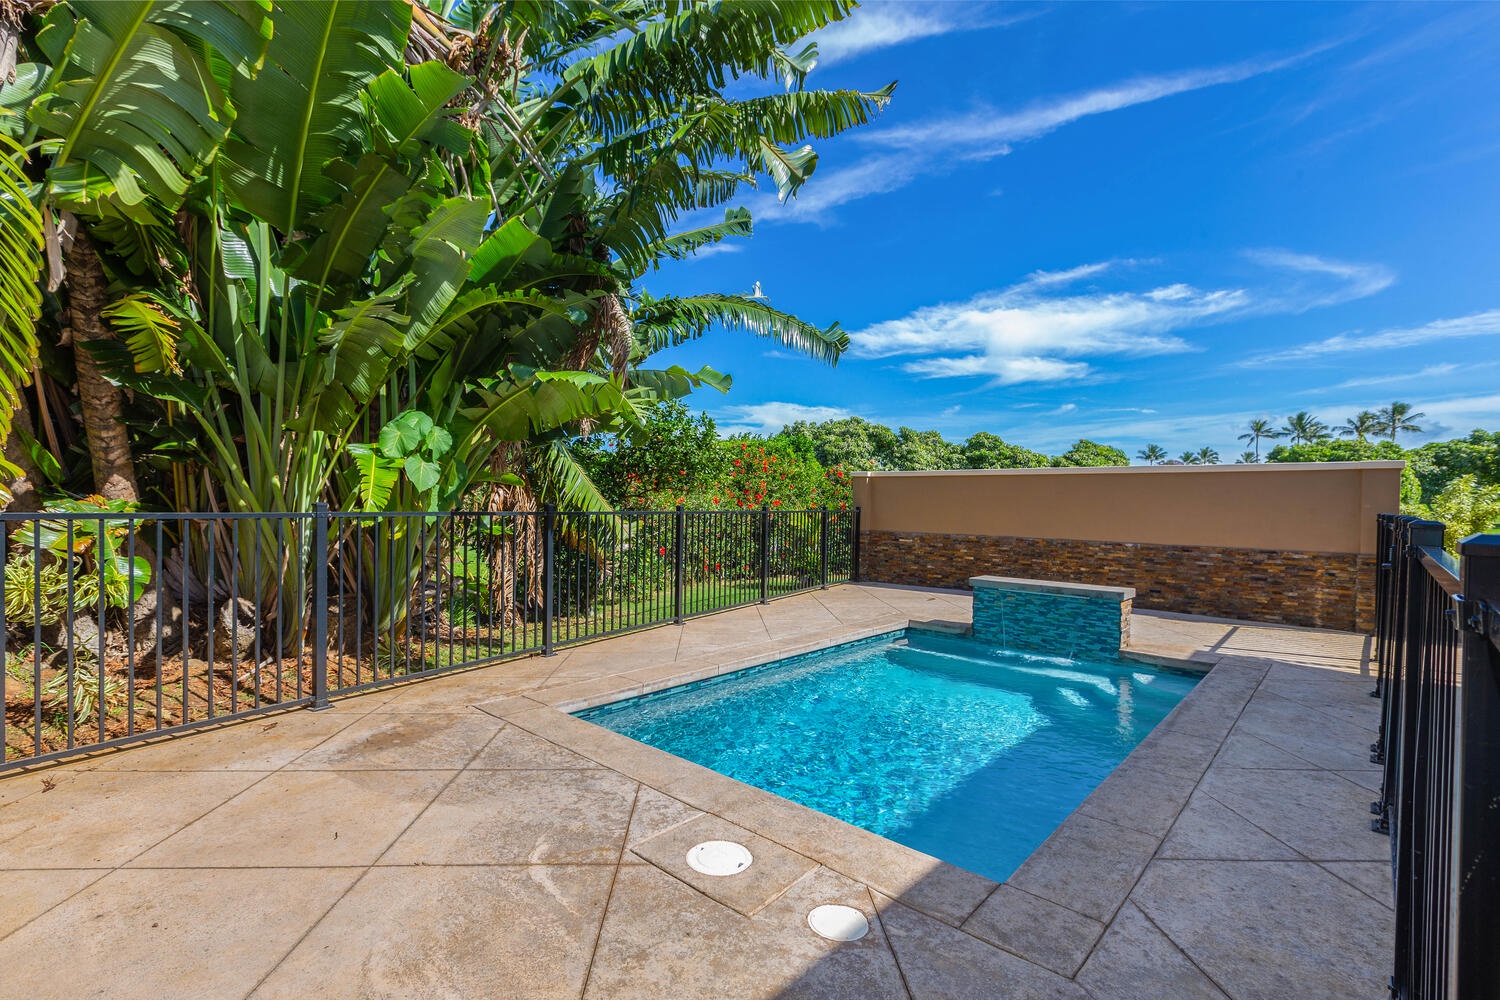 Princeville Vacation Rentals, Pohaku Villa - You can never have too much pool!